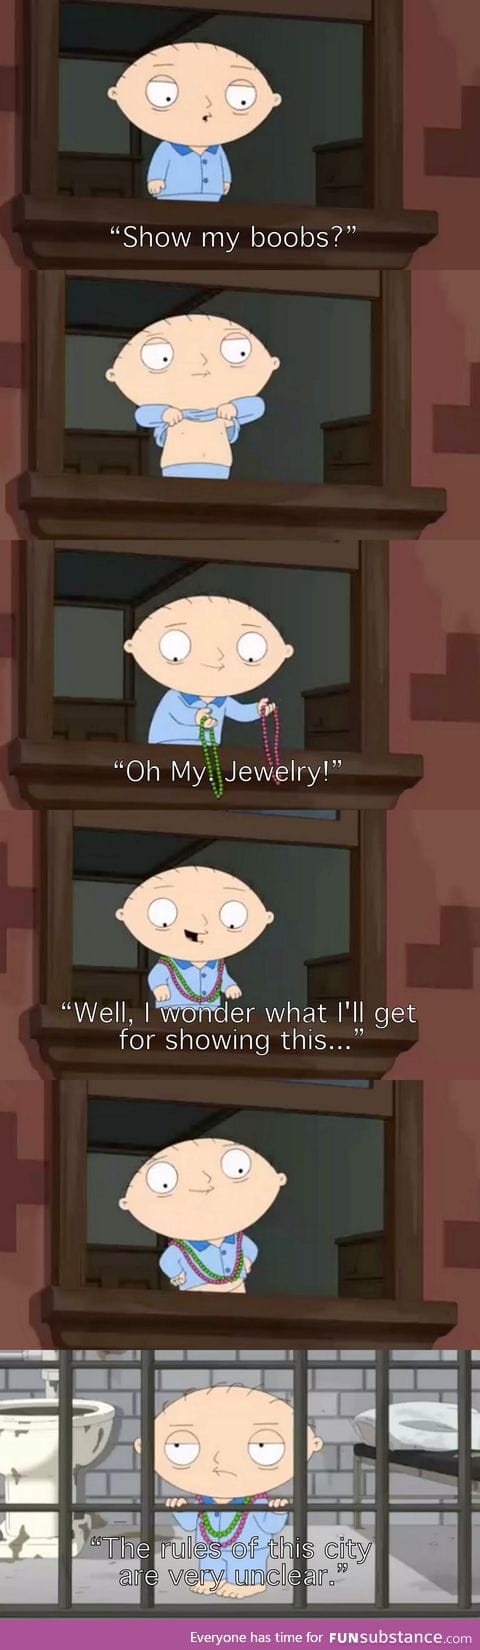 Stewie is right about New Orleans